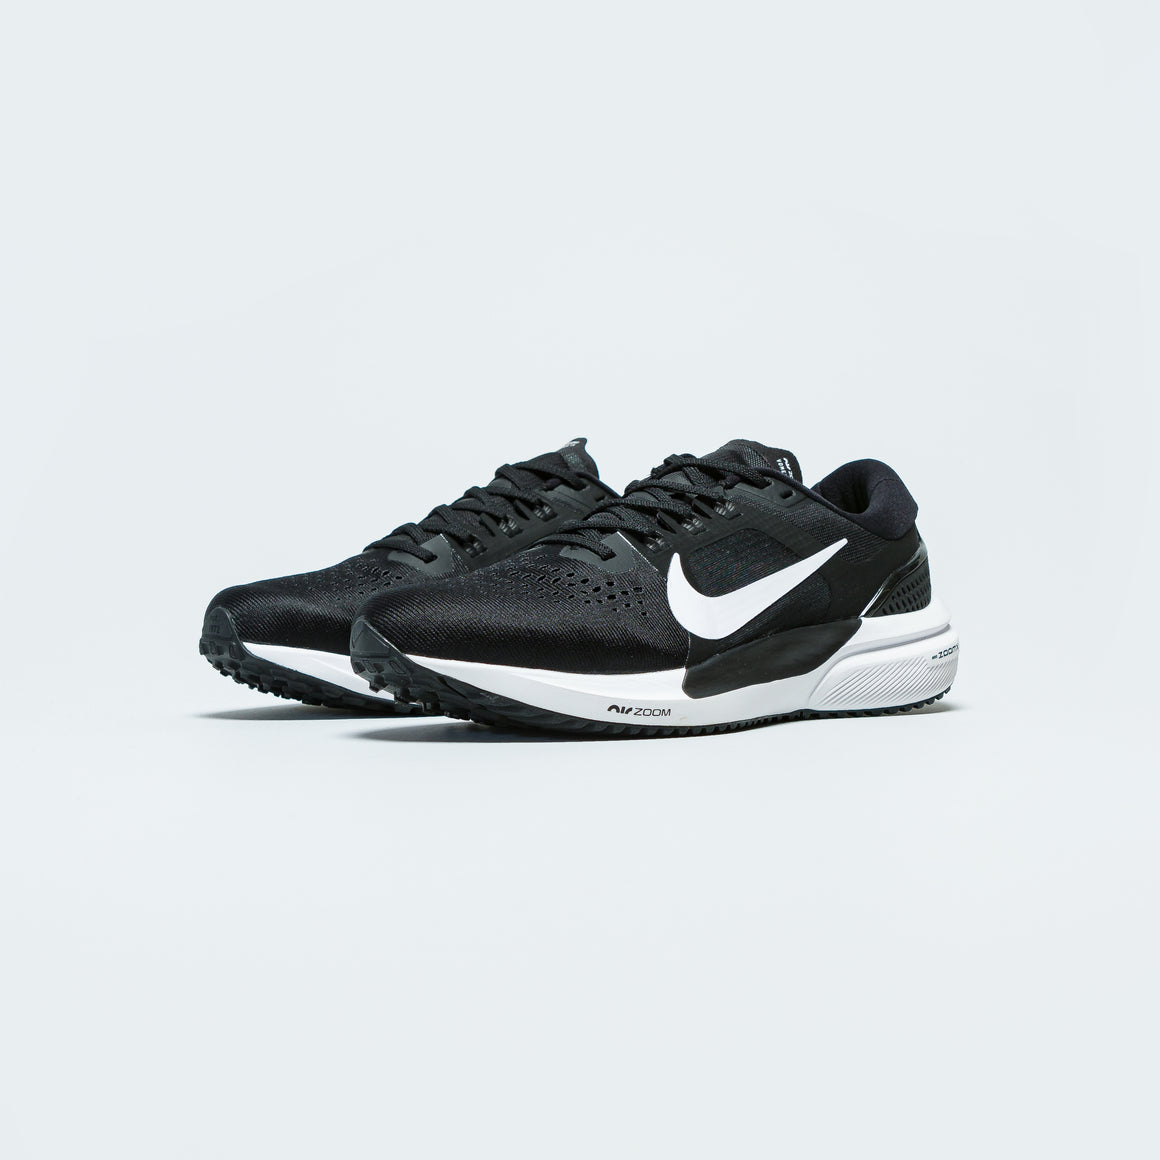 Nike - Womens Air Zoom Vomero 15 - Black/White-Anthracite-Volt - Up There Athletics